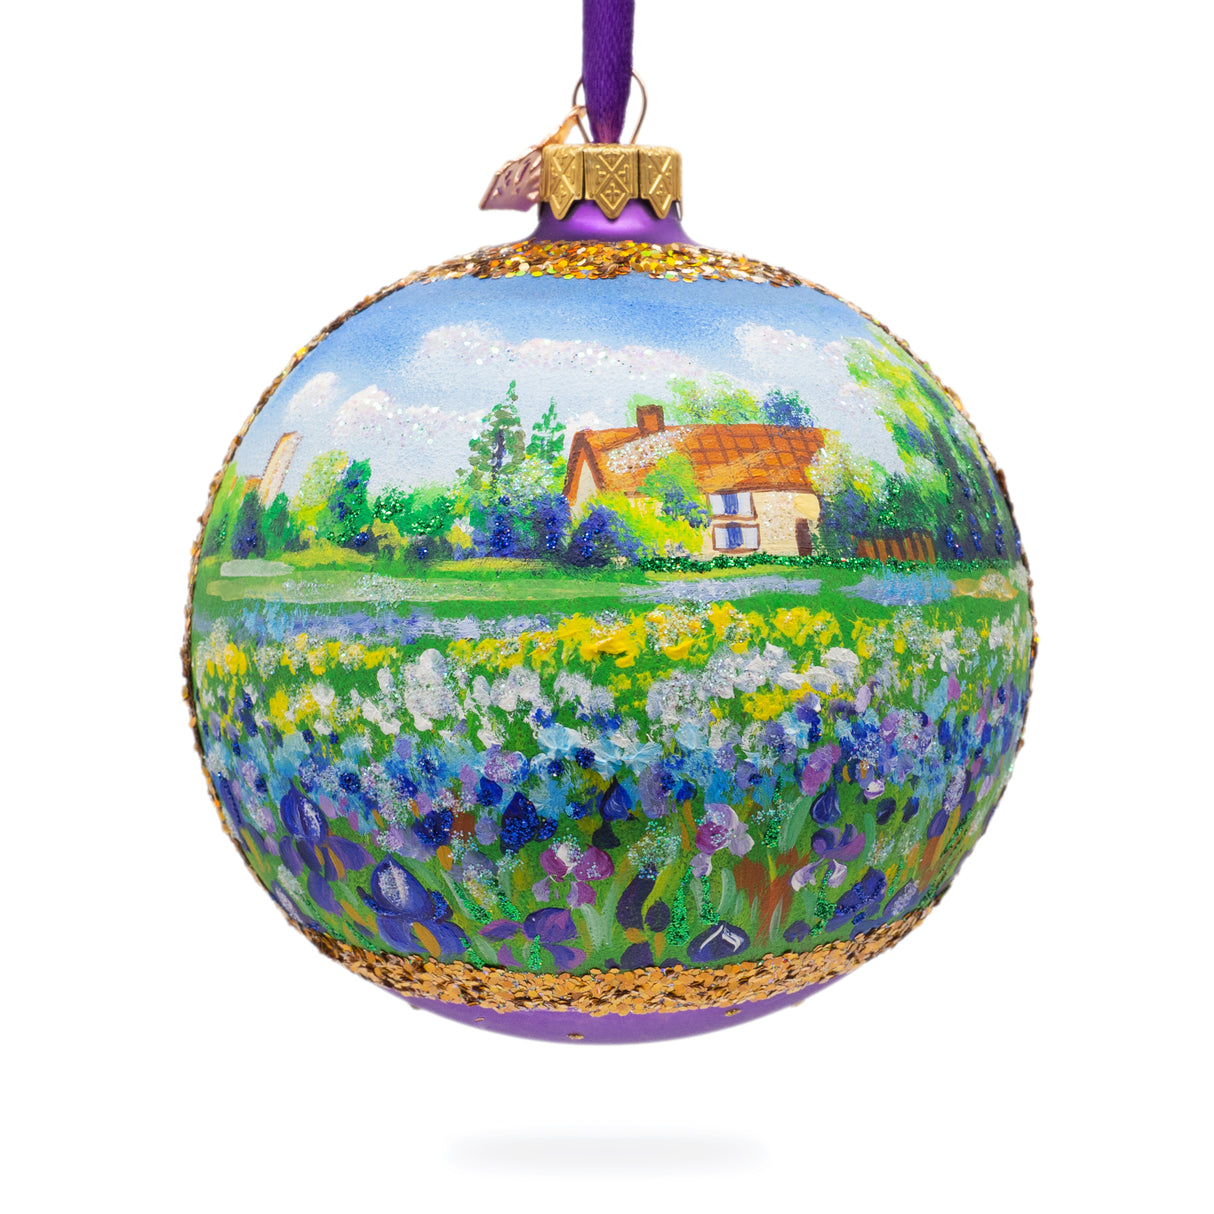 Iris Field Painting Glass Ball Christmas Ornament 4 Inches in Multi color, Round shape